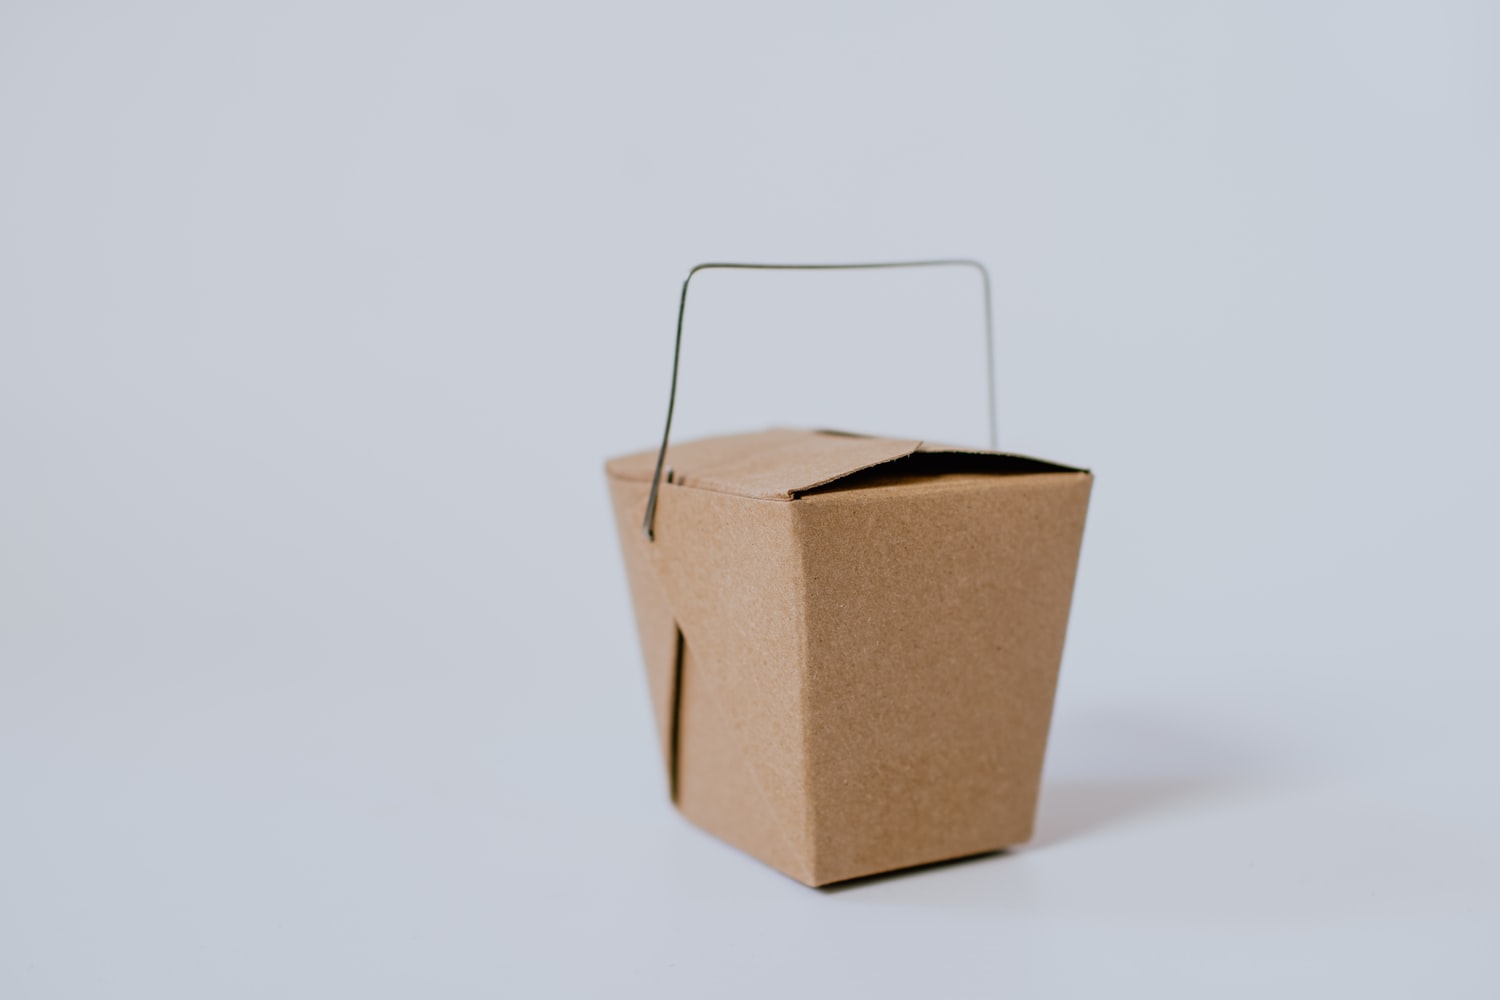 Takeout container